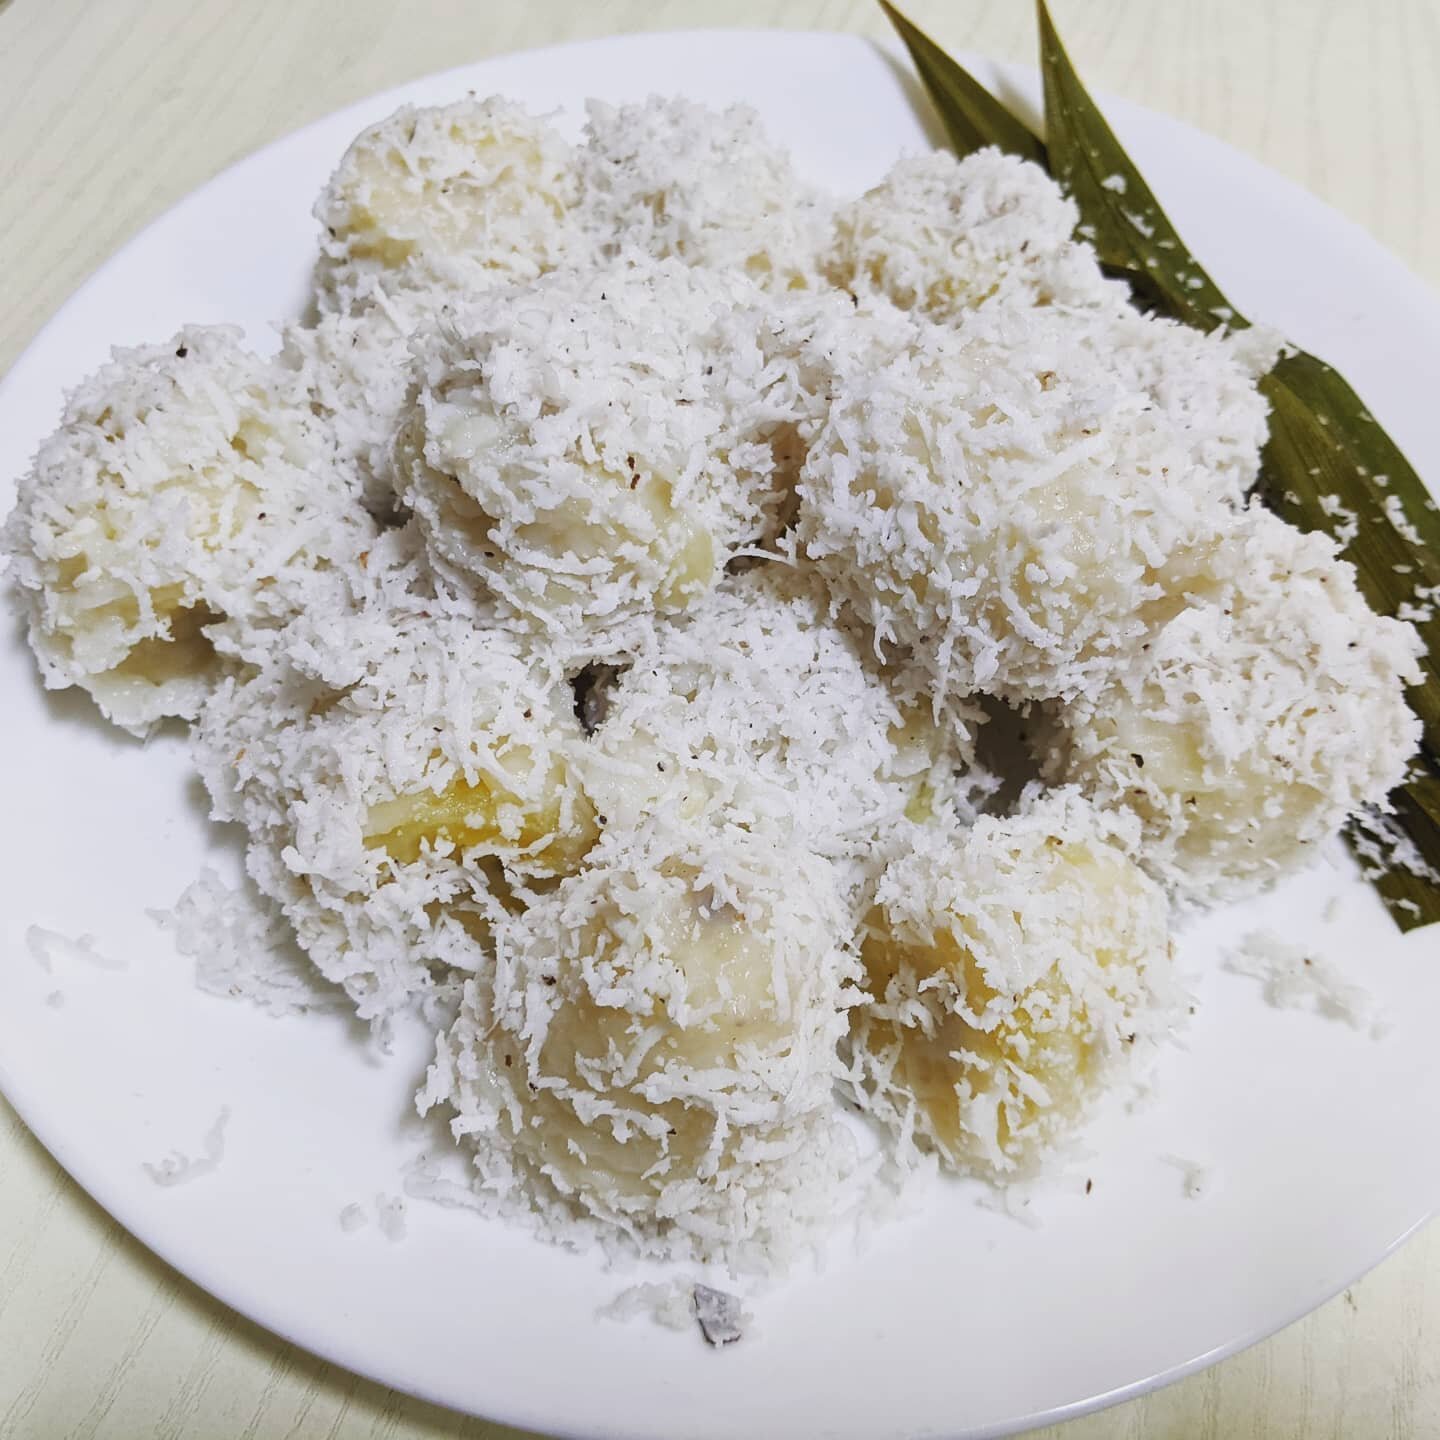 Pisang Rai (or, as I call it, Balinese banana dumplings)

It has been more than 18 months since I last visited Indonesia. The Internet does help, but I find that only something physical, such as food, can truly soothe the sense of longing that someti